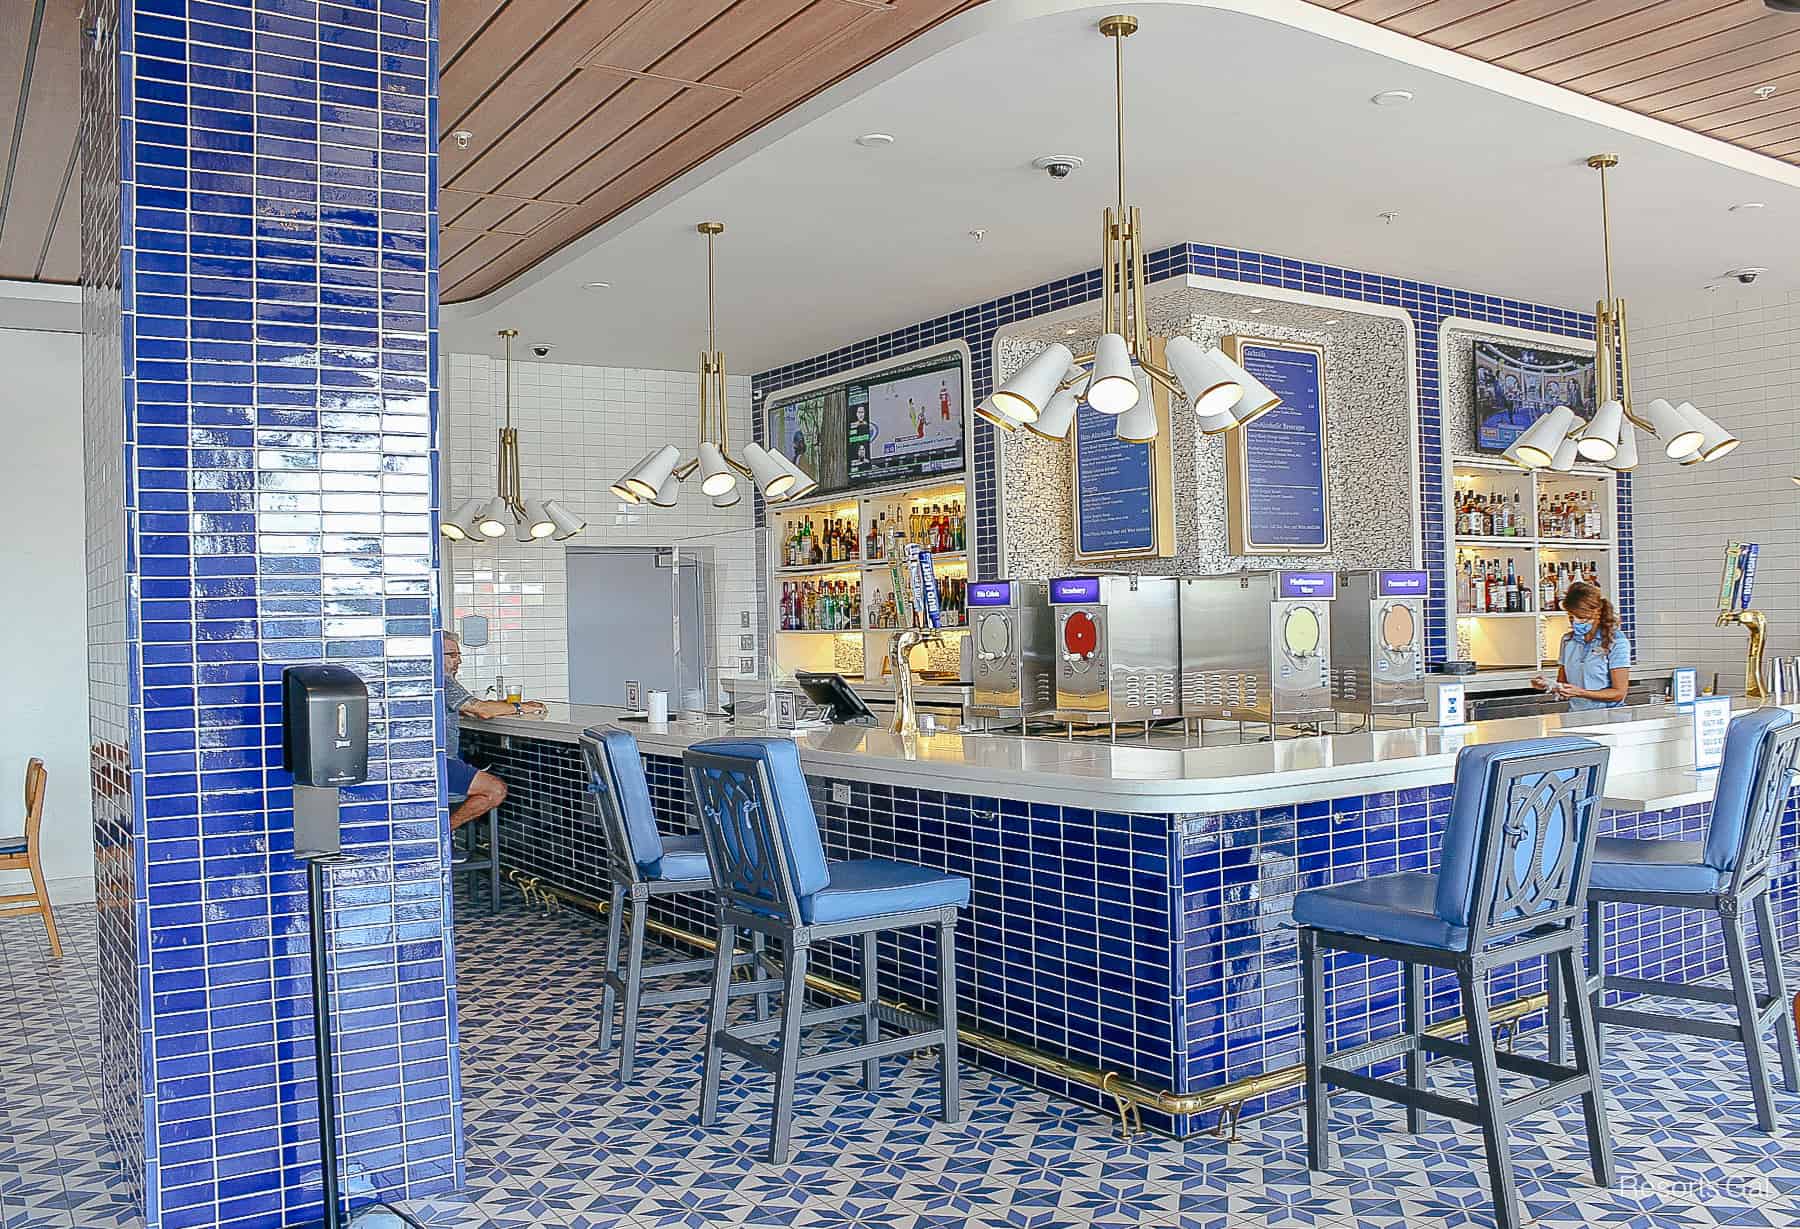 the Bar Riva Lounge with lots of blue tile work in various patterns with white accents 